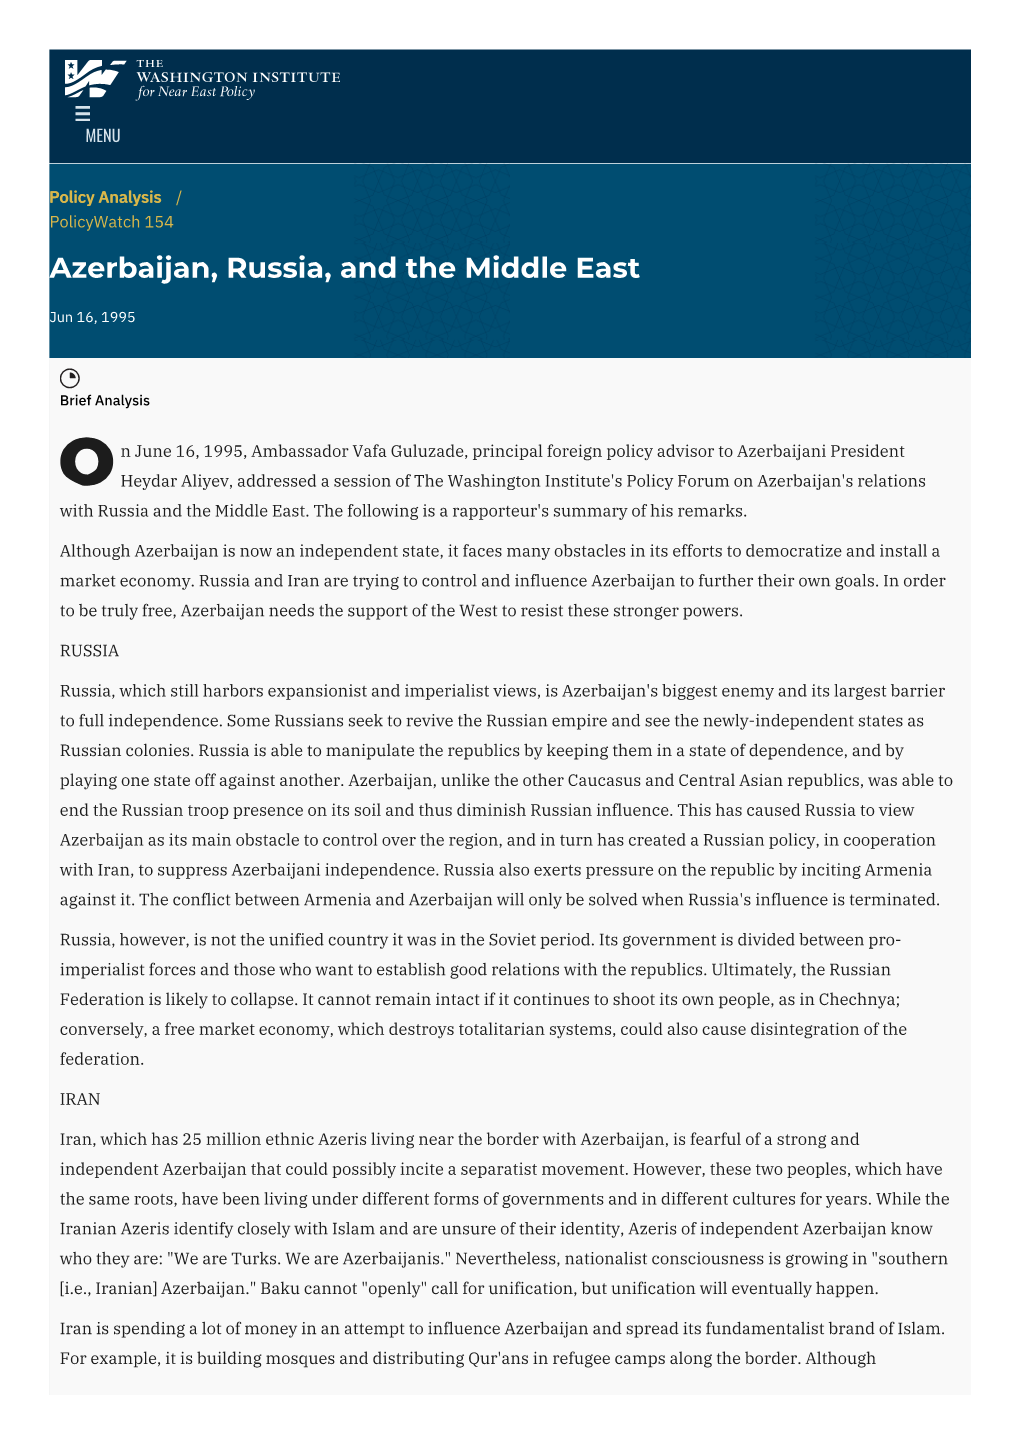 Azerbaijan, Russia, and the Middle East | the Washington Institute